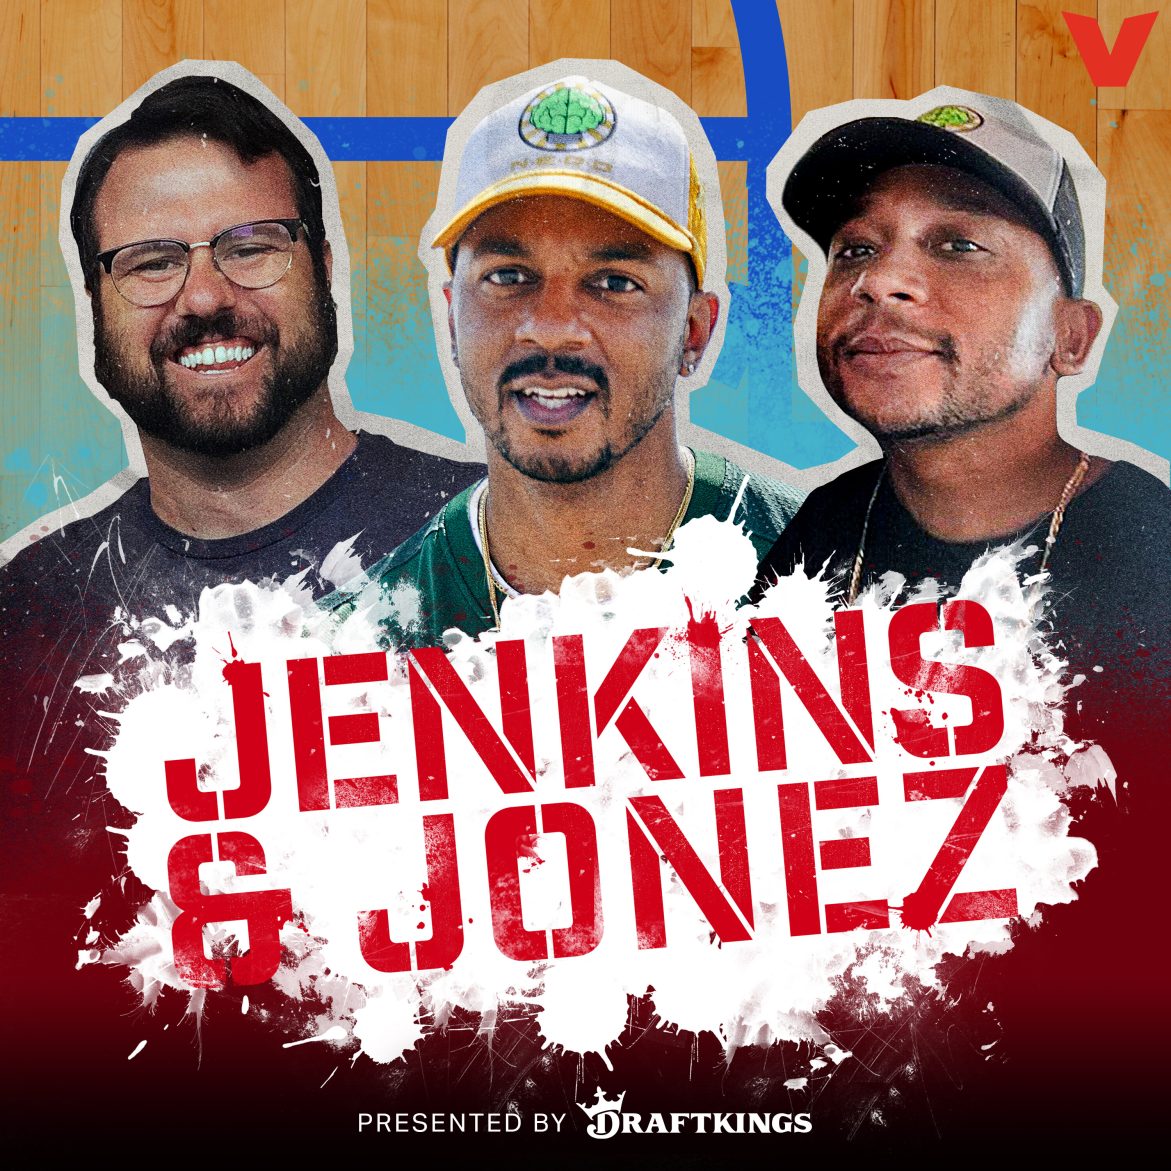 Black Podcasting - Jenkins and Jonez - Super Bowl Preview With the Gridiron Gals